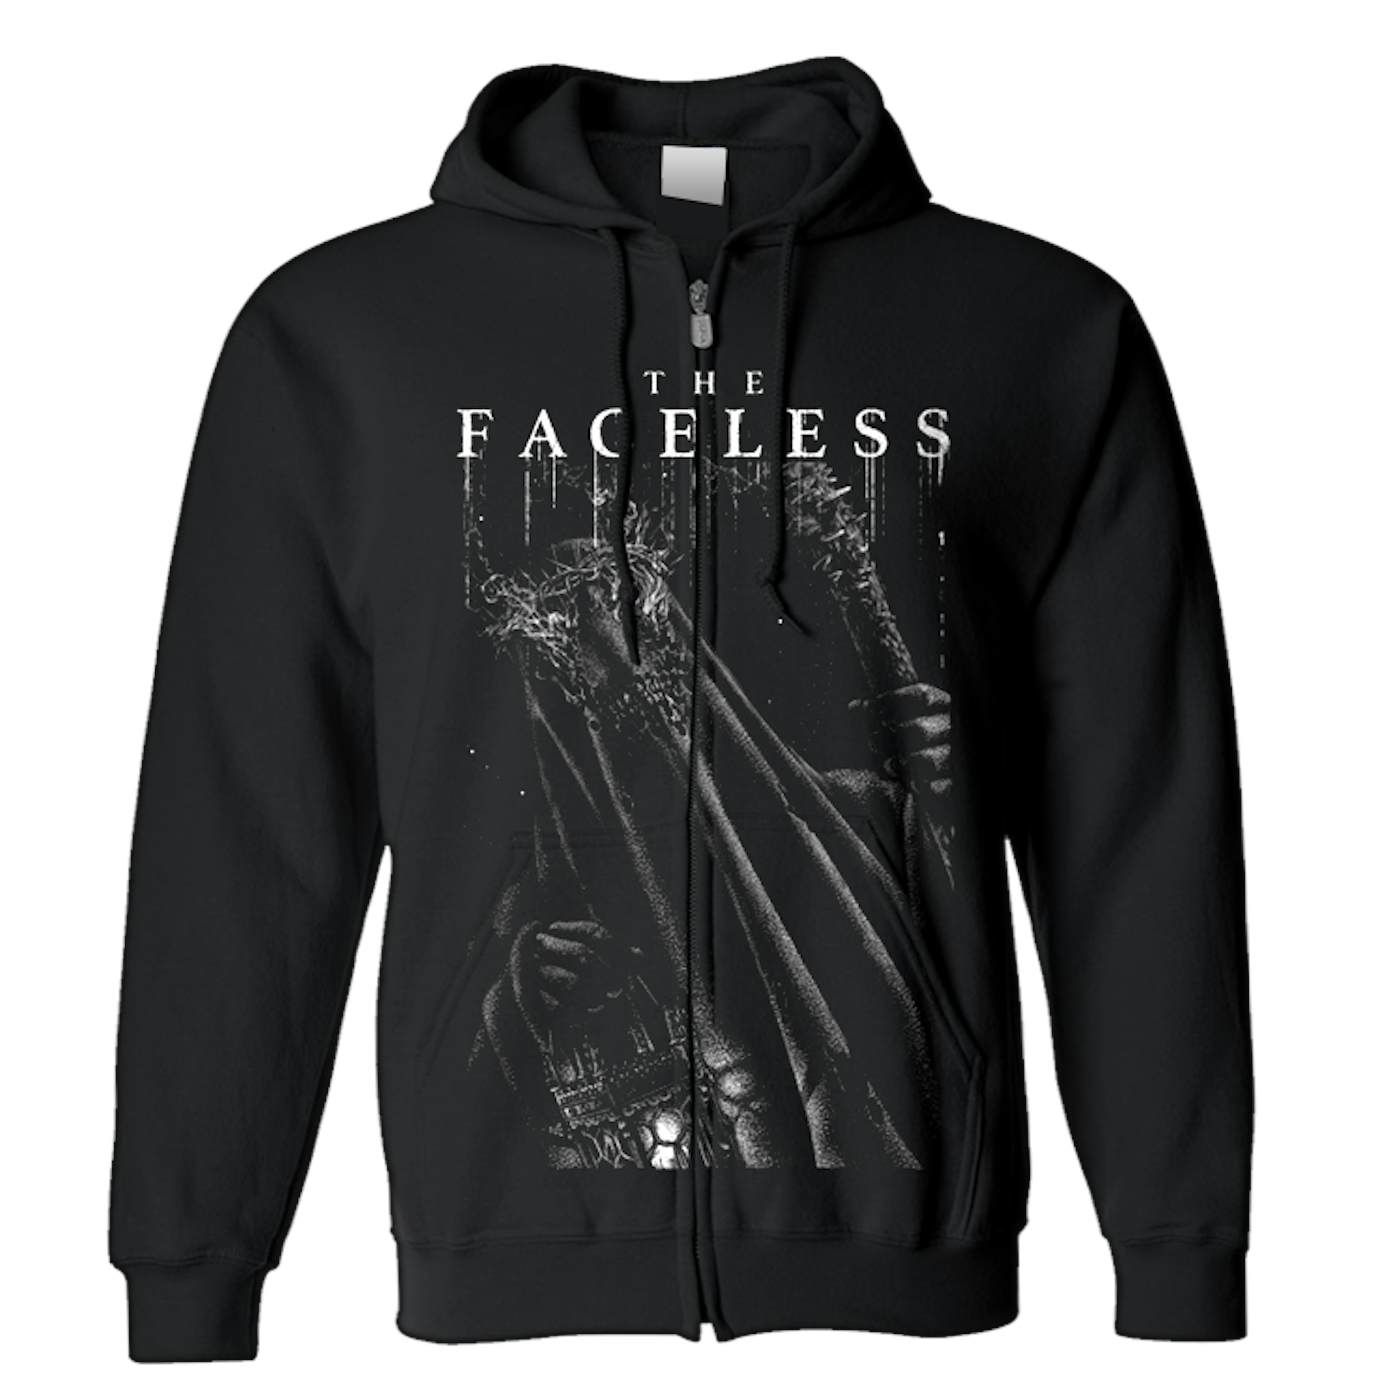 THE FACELESS - 'Witch' Zip-Up Hoodie